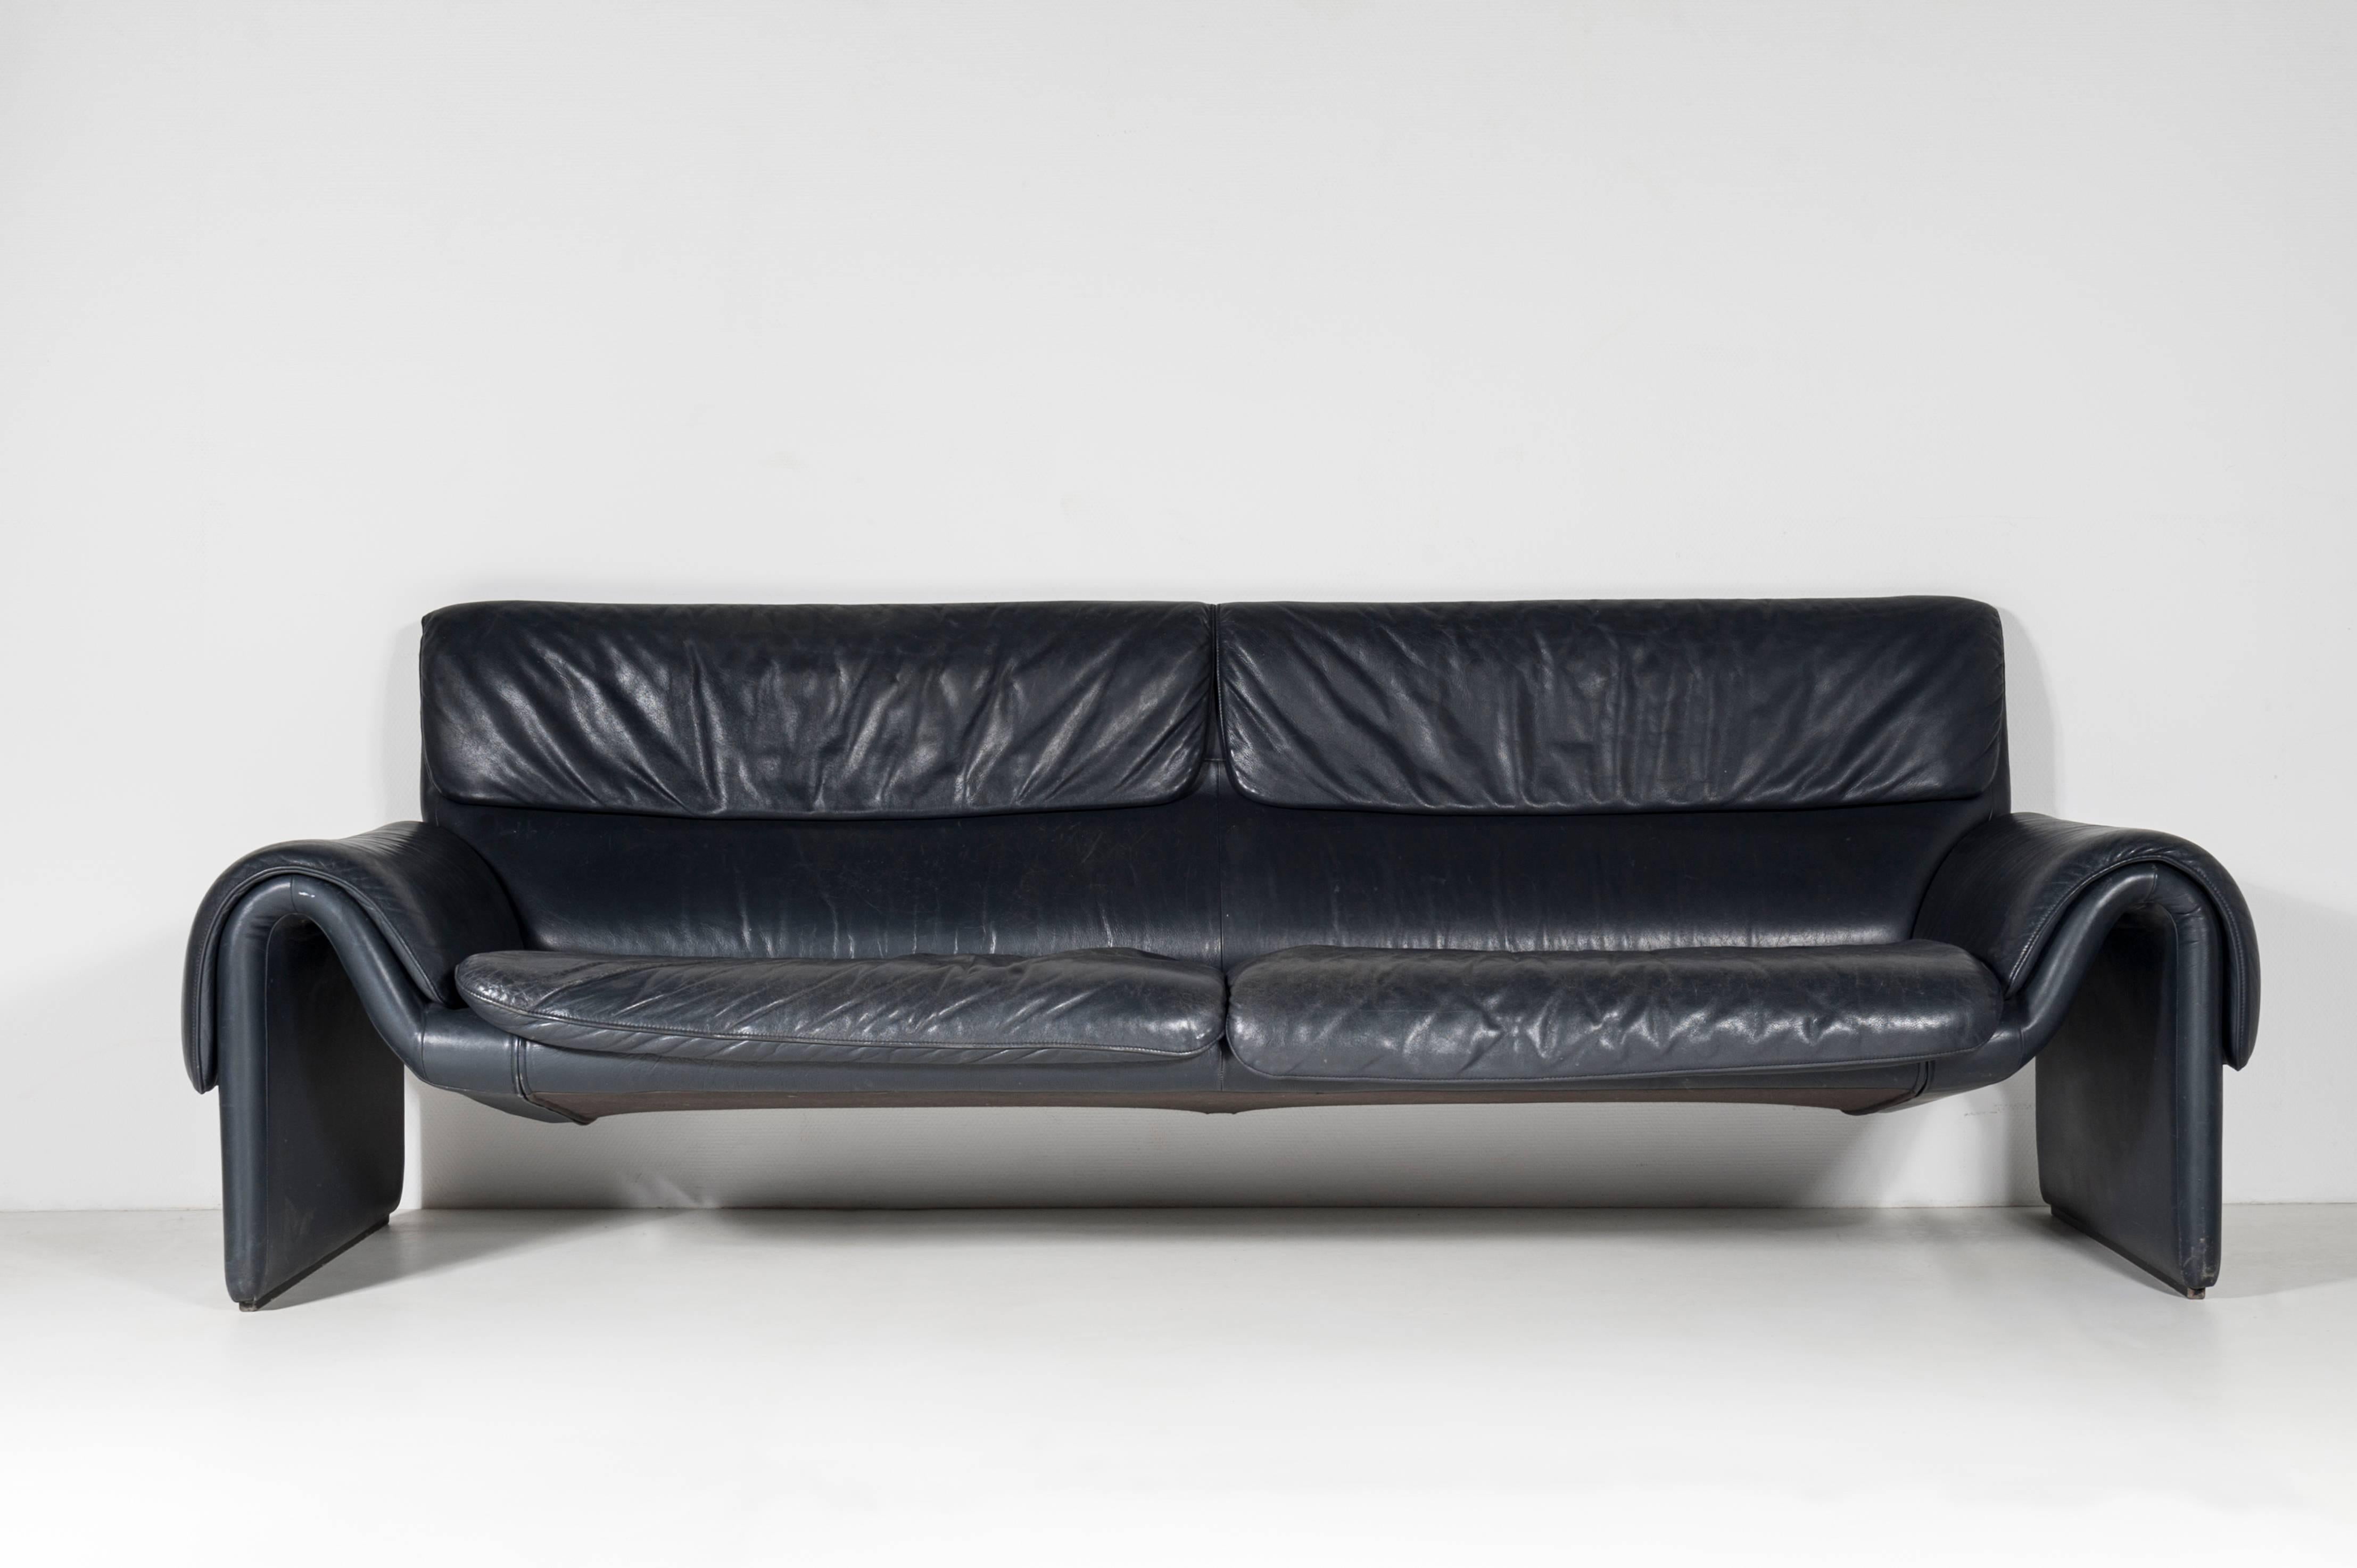 Dark blue colored original De Sede DS 2011 designer pair of leather sofa (three-seat) in a minimalistic and modern design, made for pure comfort and style,
circa 1990.
Dimensions: 230 x 75 x 80 H cm
The DS-2011 sofa is designed by de Sede